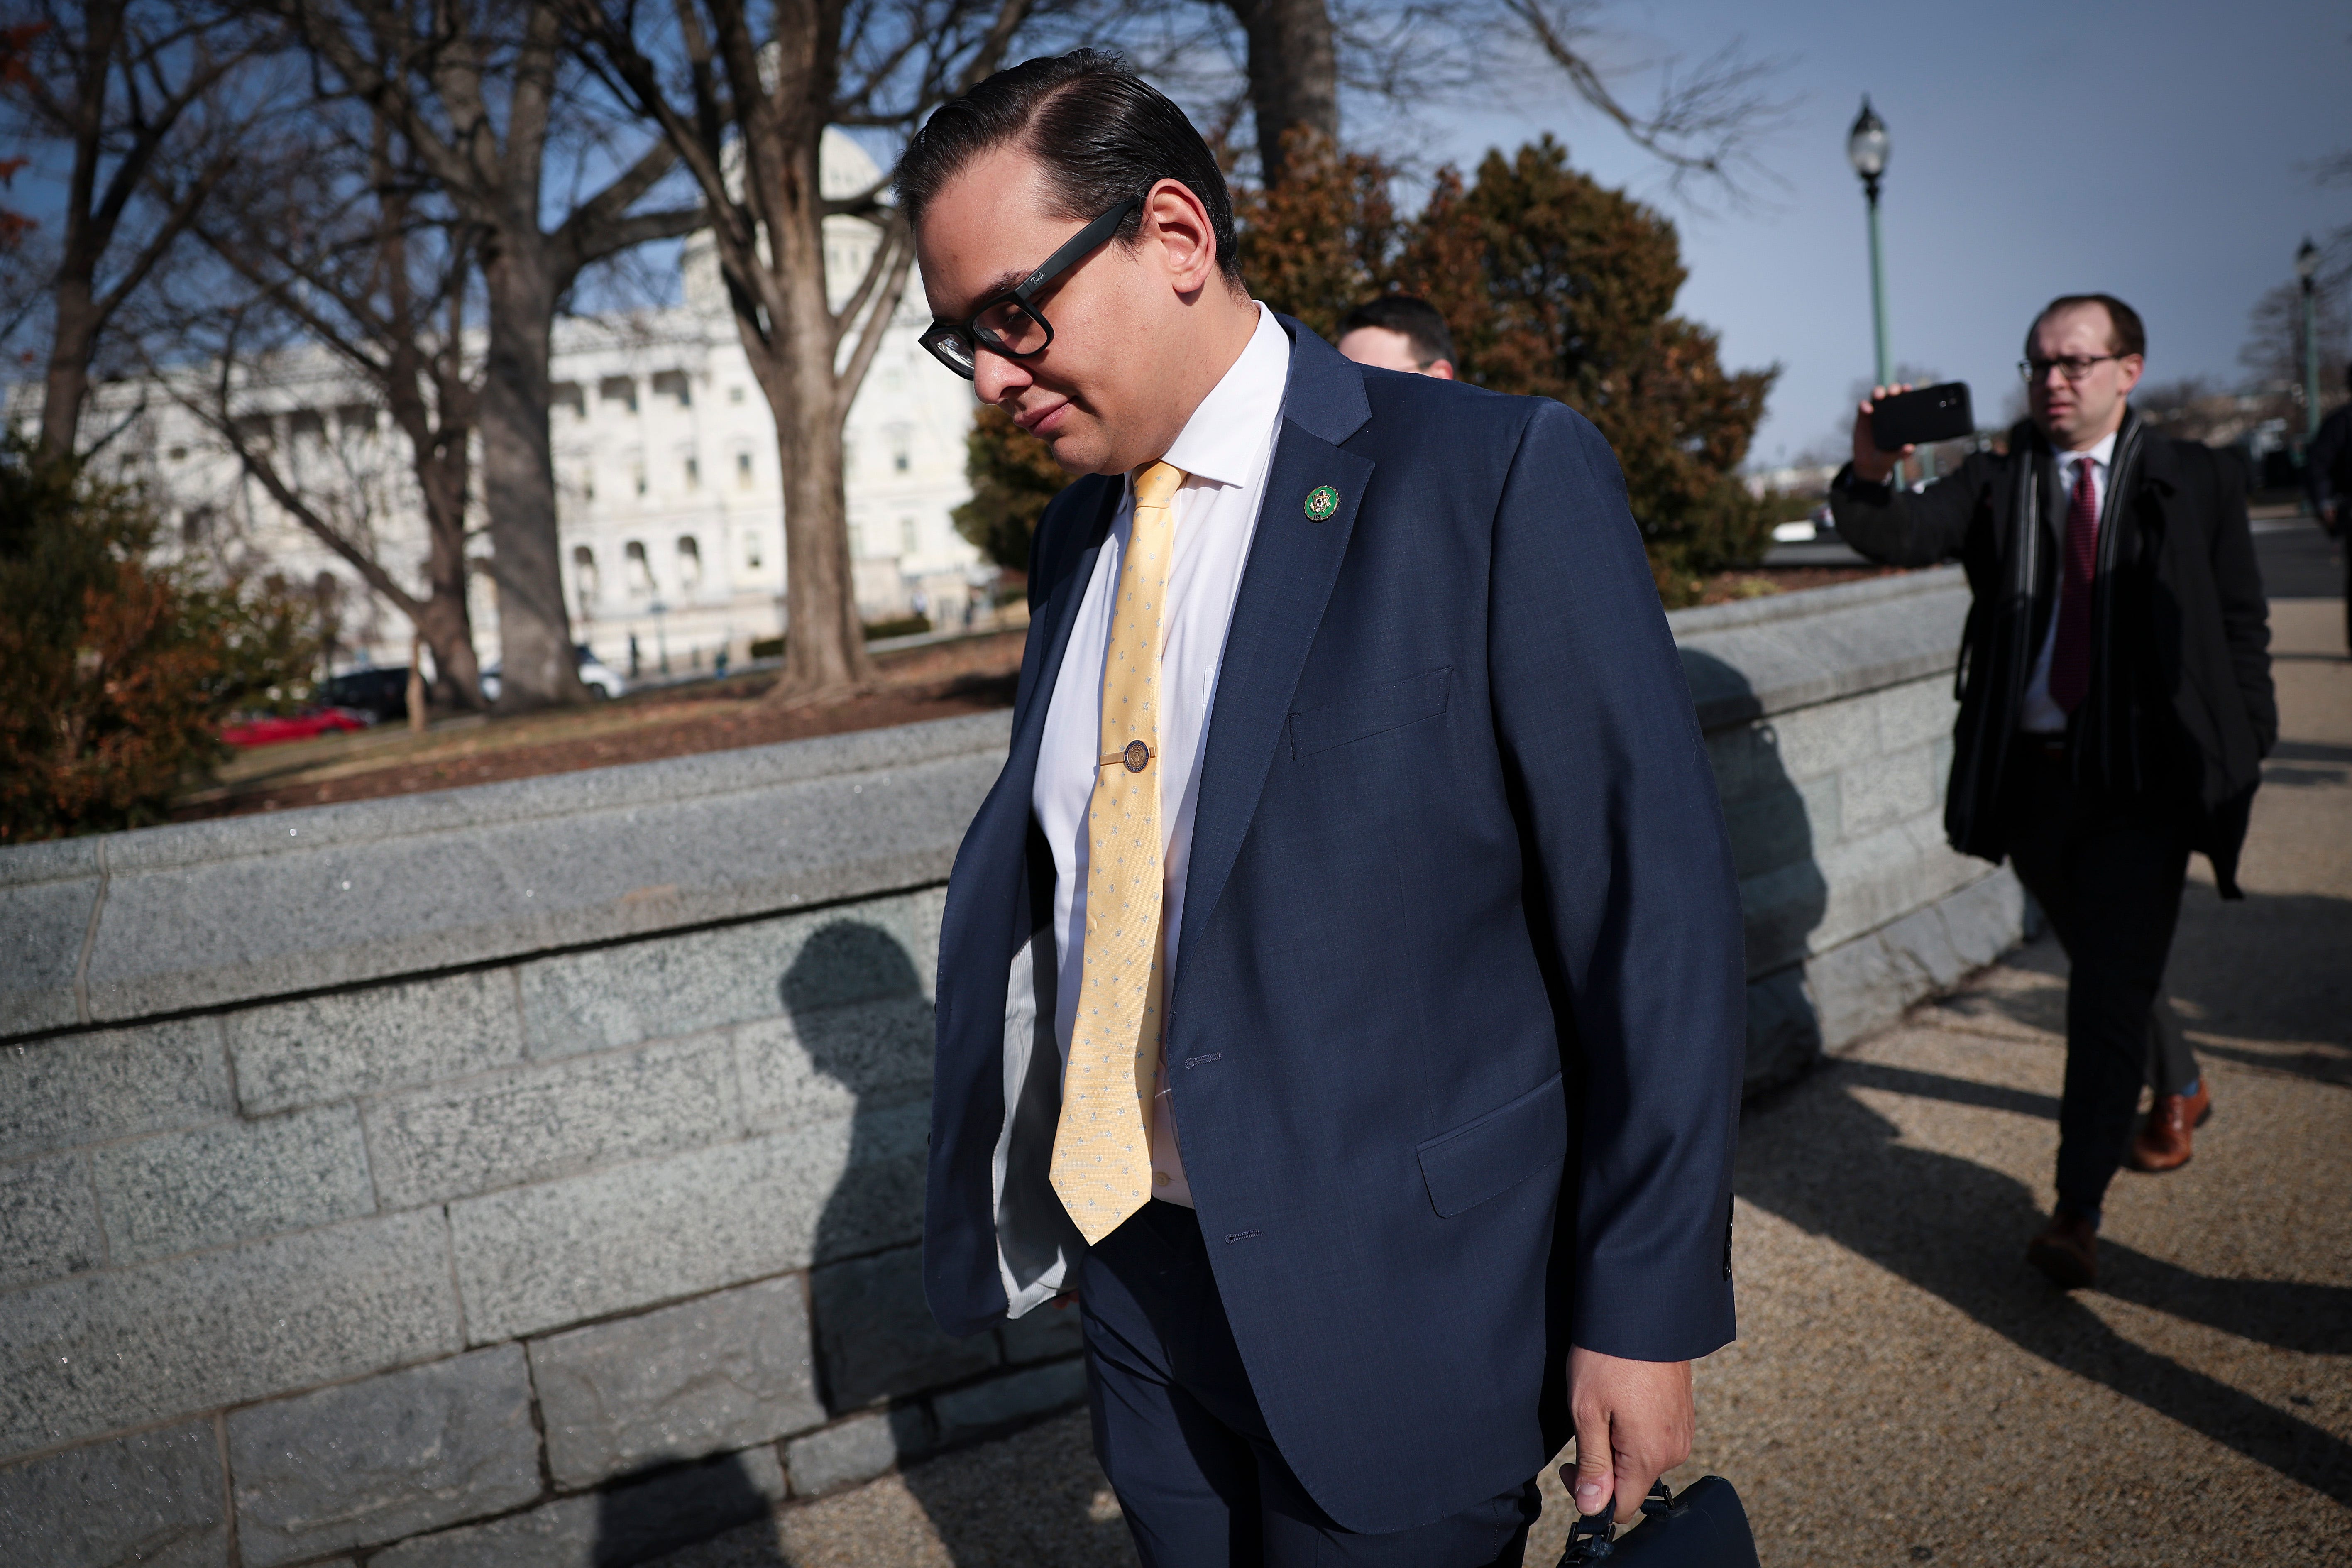 Embattled Rep. George Santos resigns from House Committees: live updates